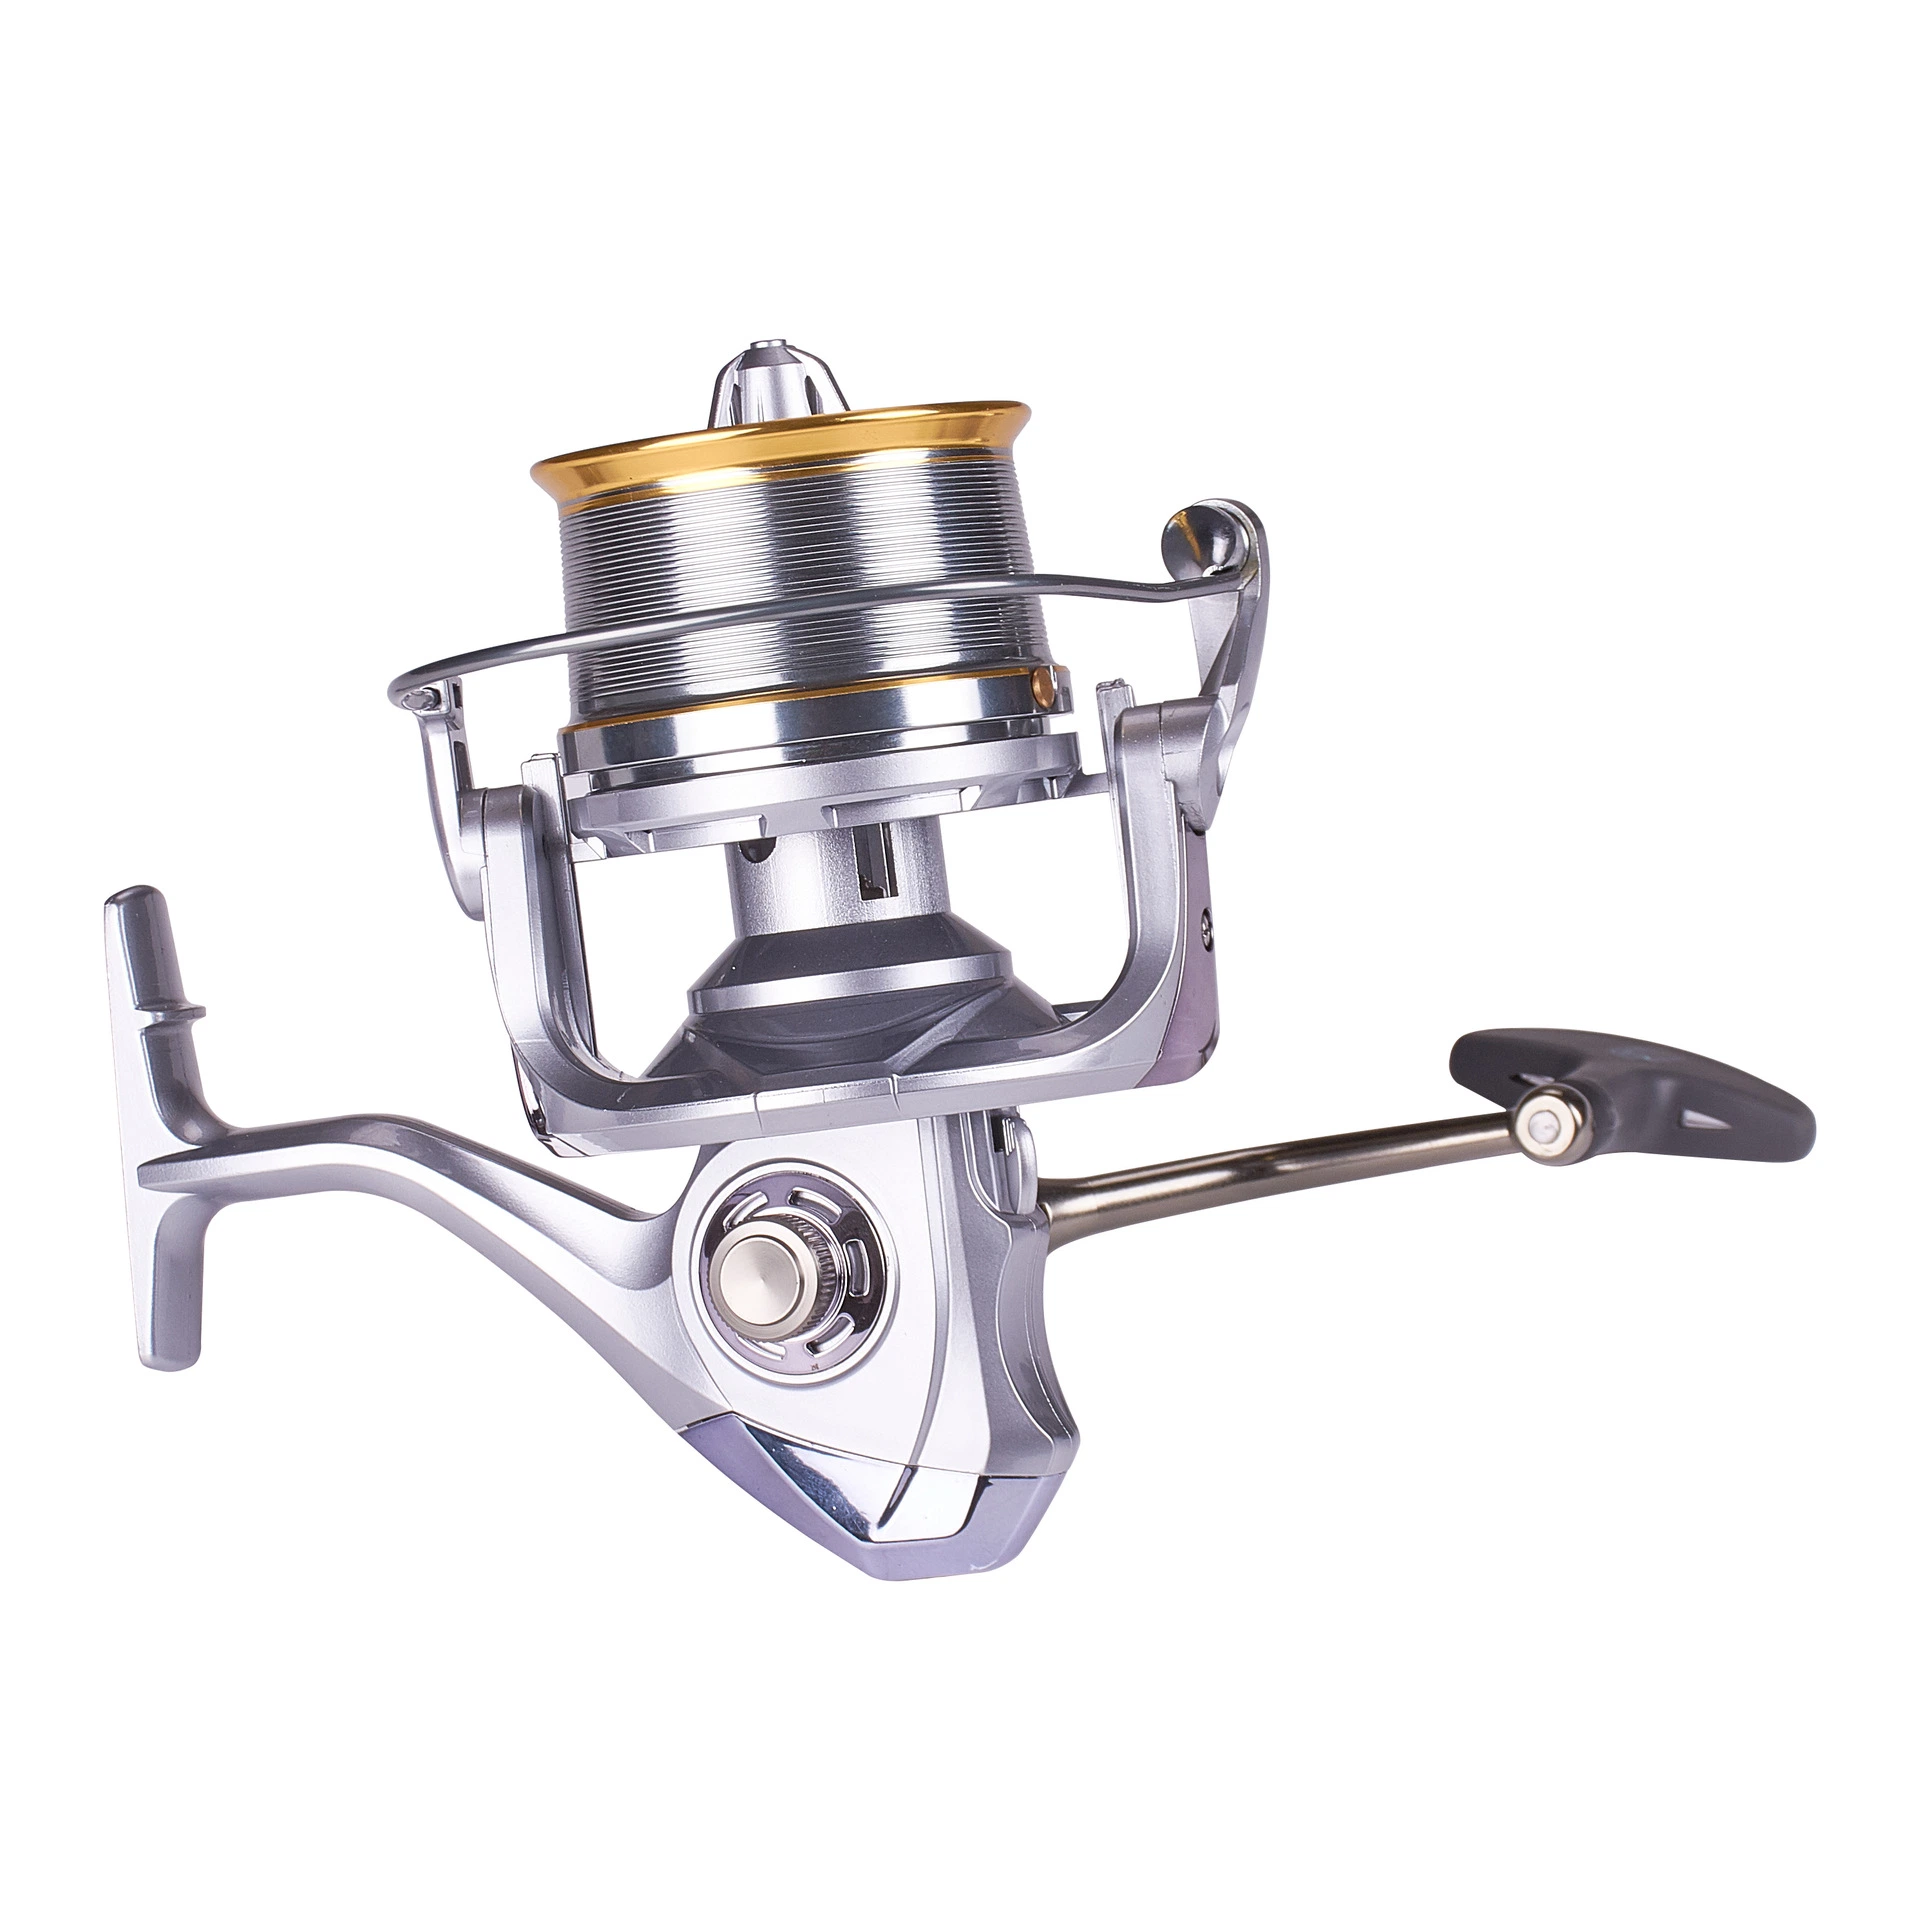 Fish Reels Factory Shallow Line Cup Long Throw Fishing Gear Boat Reel Non-Clearance Spinning Wheel Saltwater Boat Big Game Wyz19100